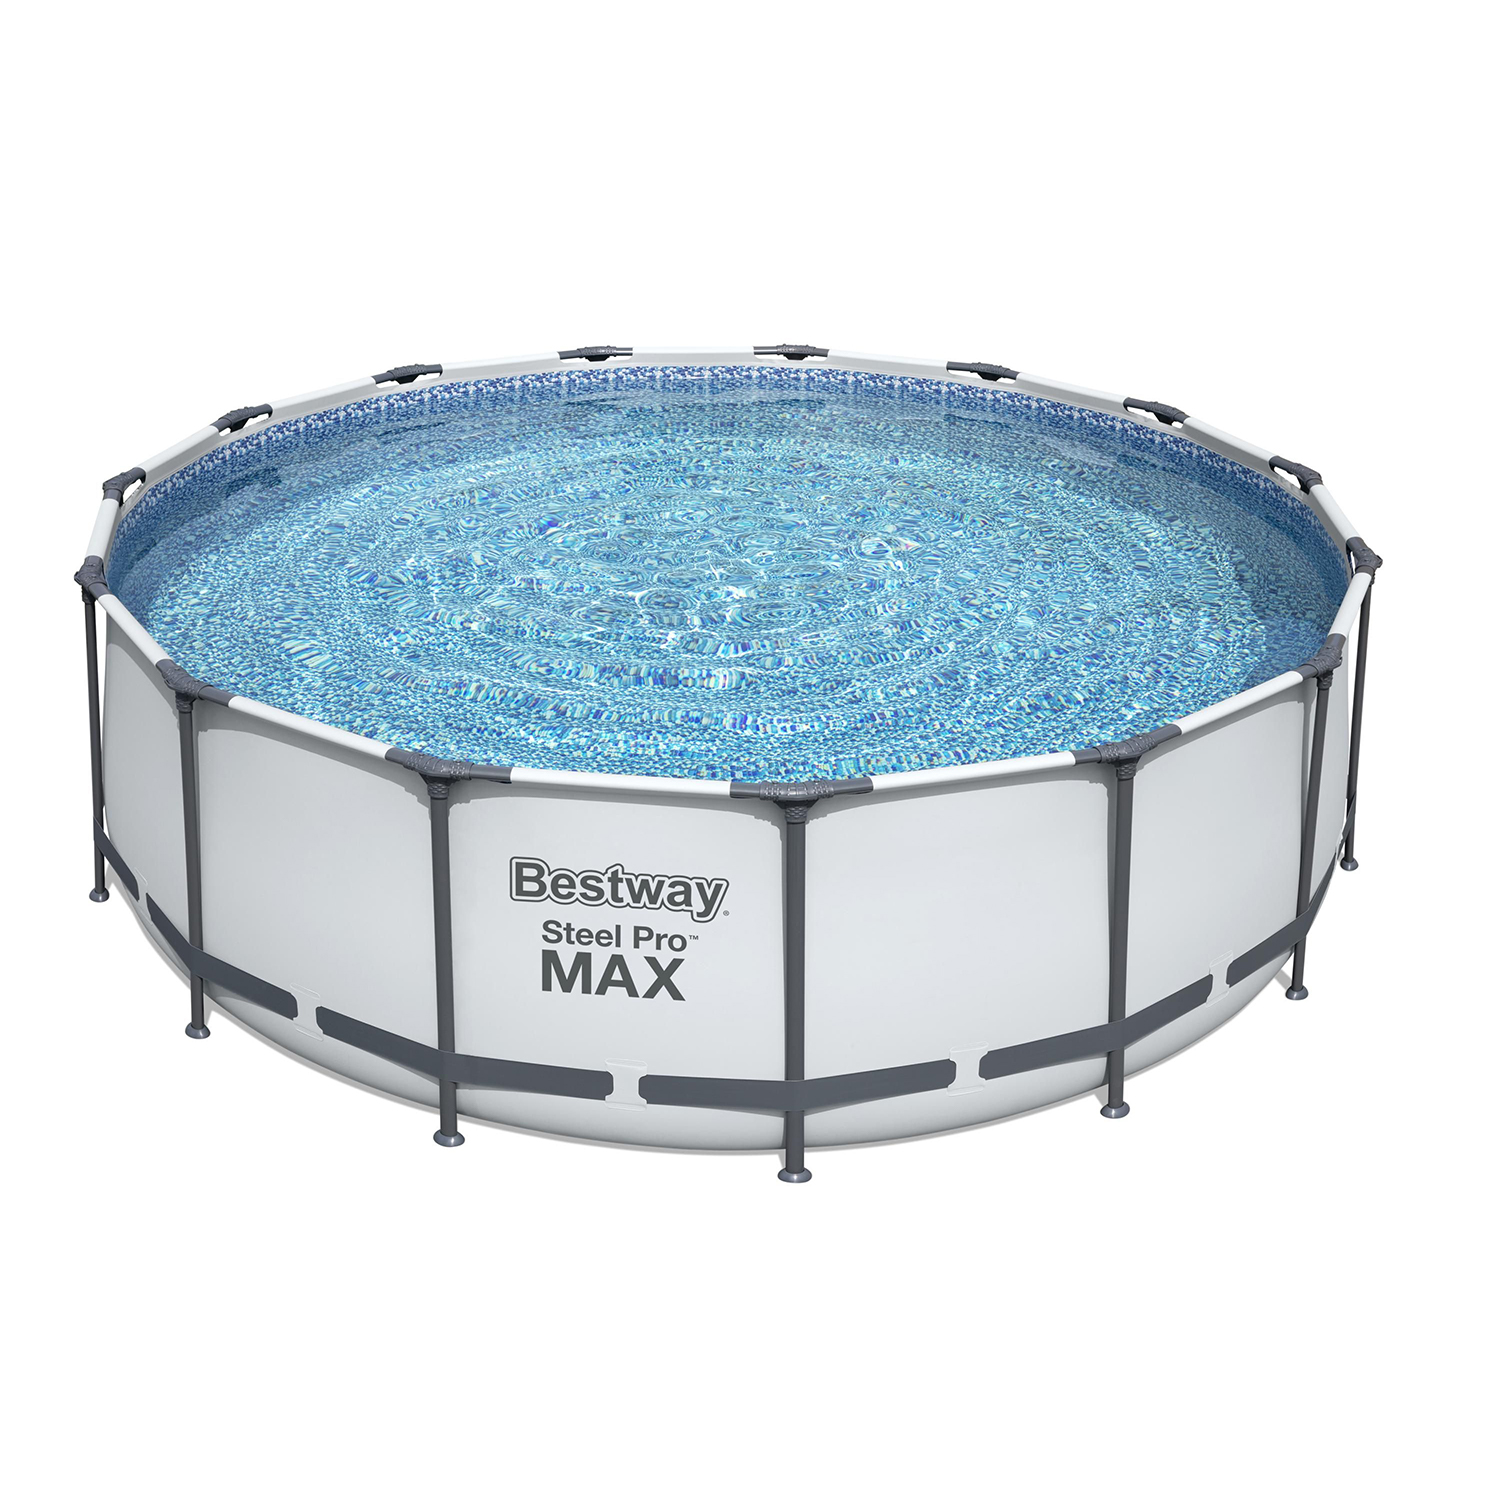 Bestway Steel Pro MAX 15' x 48" Round Above Ground Swimming Pool Set - image 3 of 11